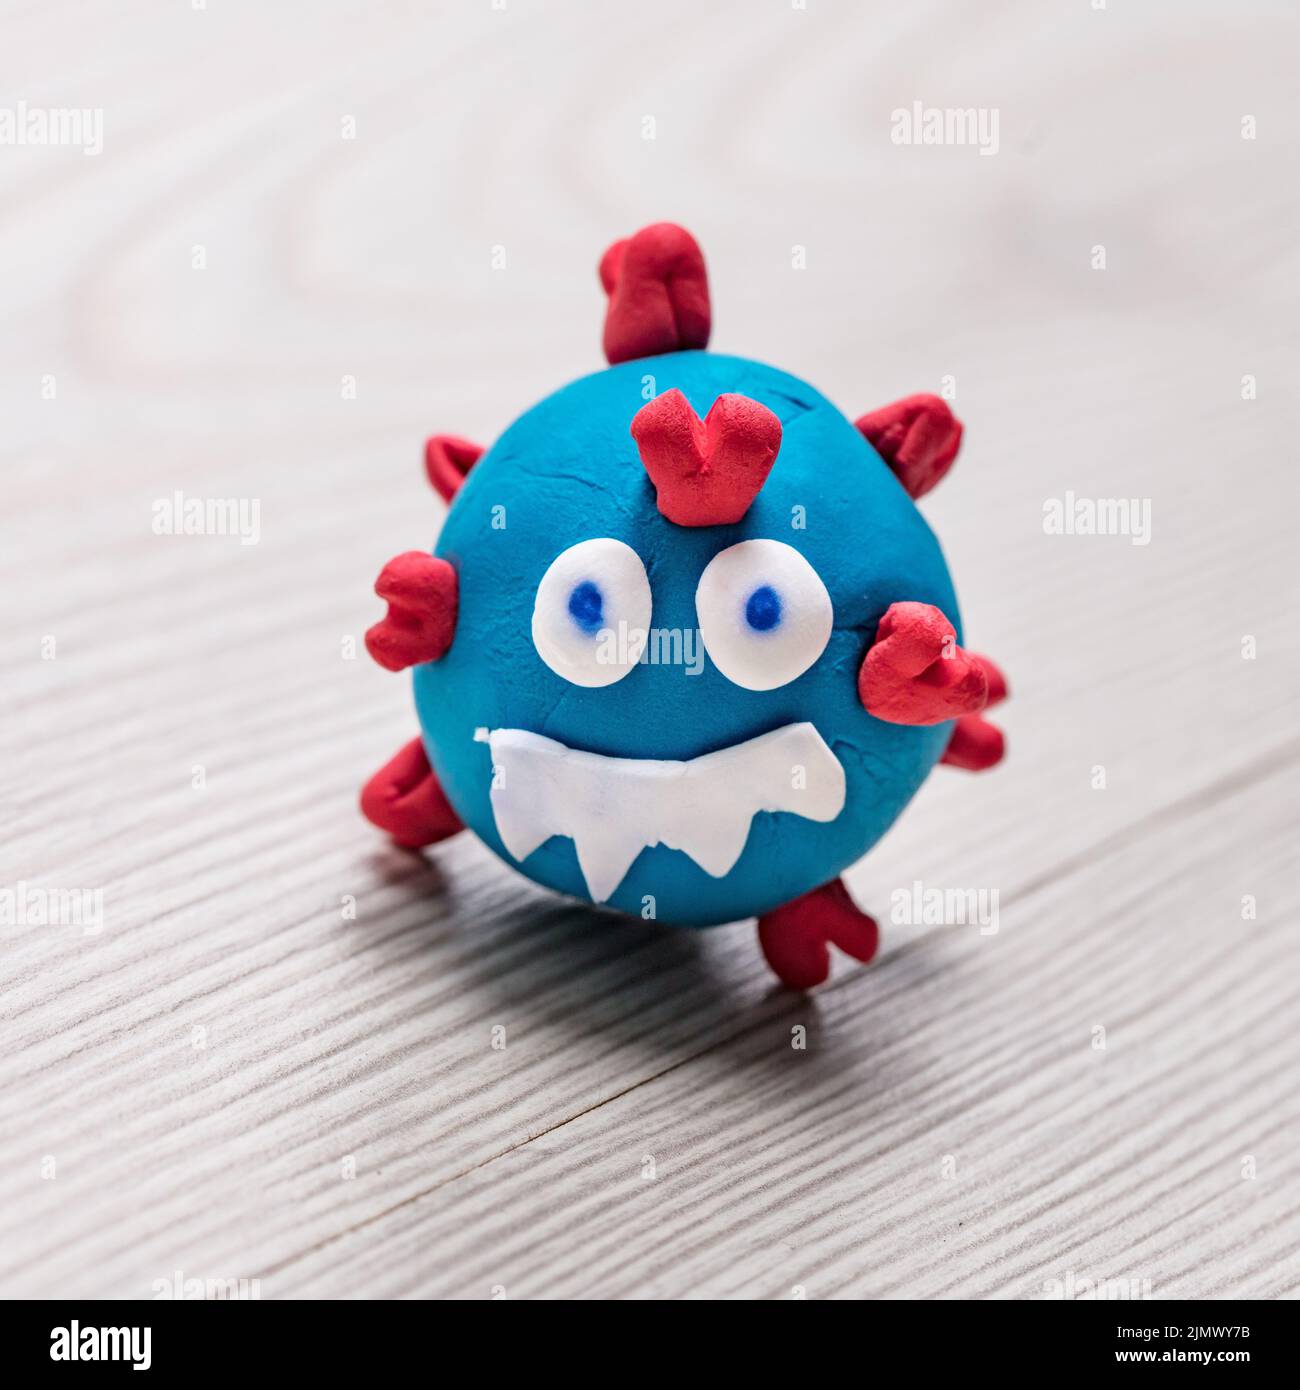 puppet depicting a small COVID-19 virus monster, smiling evilly and ready to strike... until its total defeat. Stock Photo